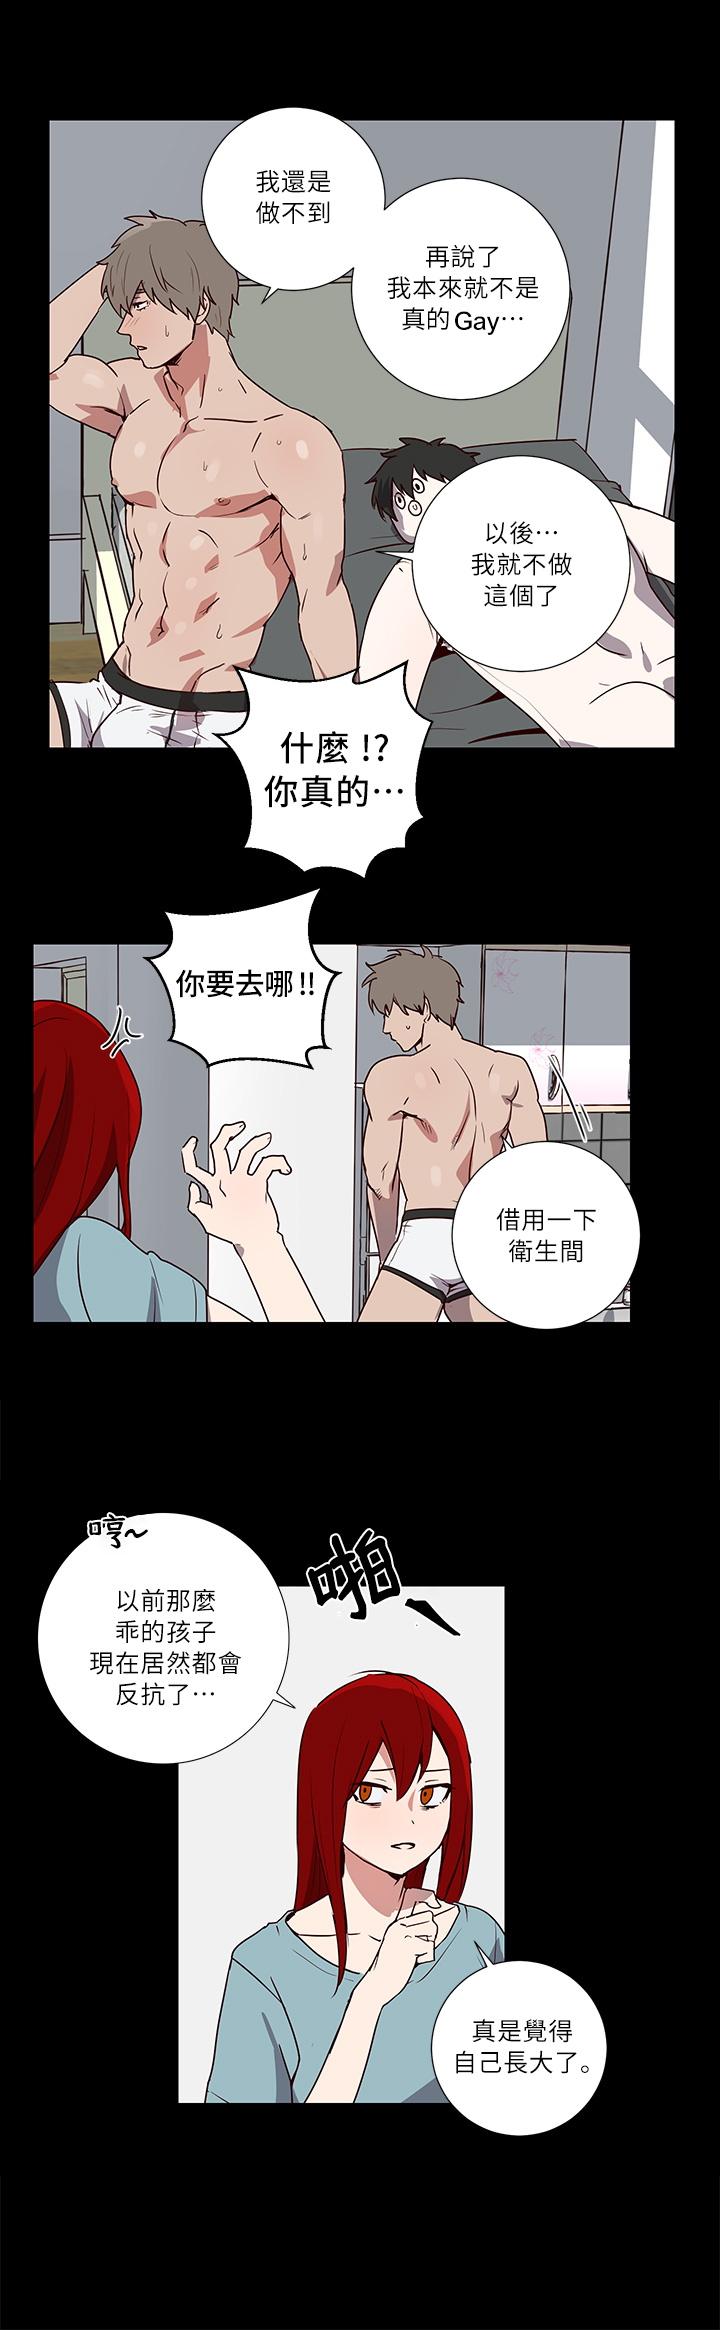 Farting 莫捡肥皂 01 Chinese Class - Page 11